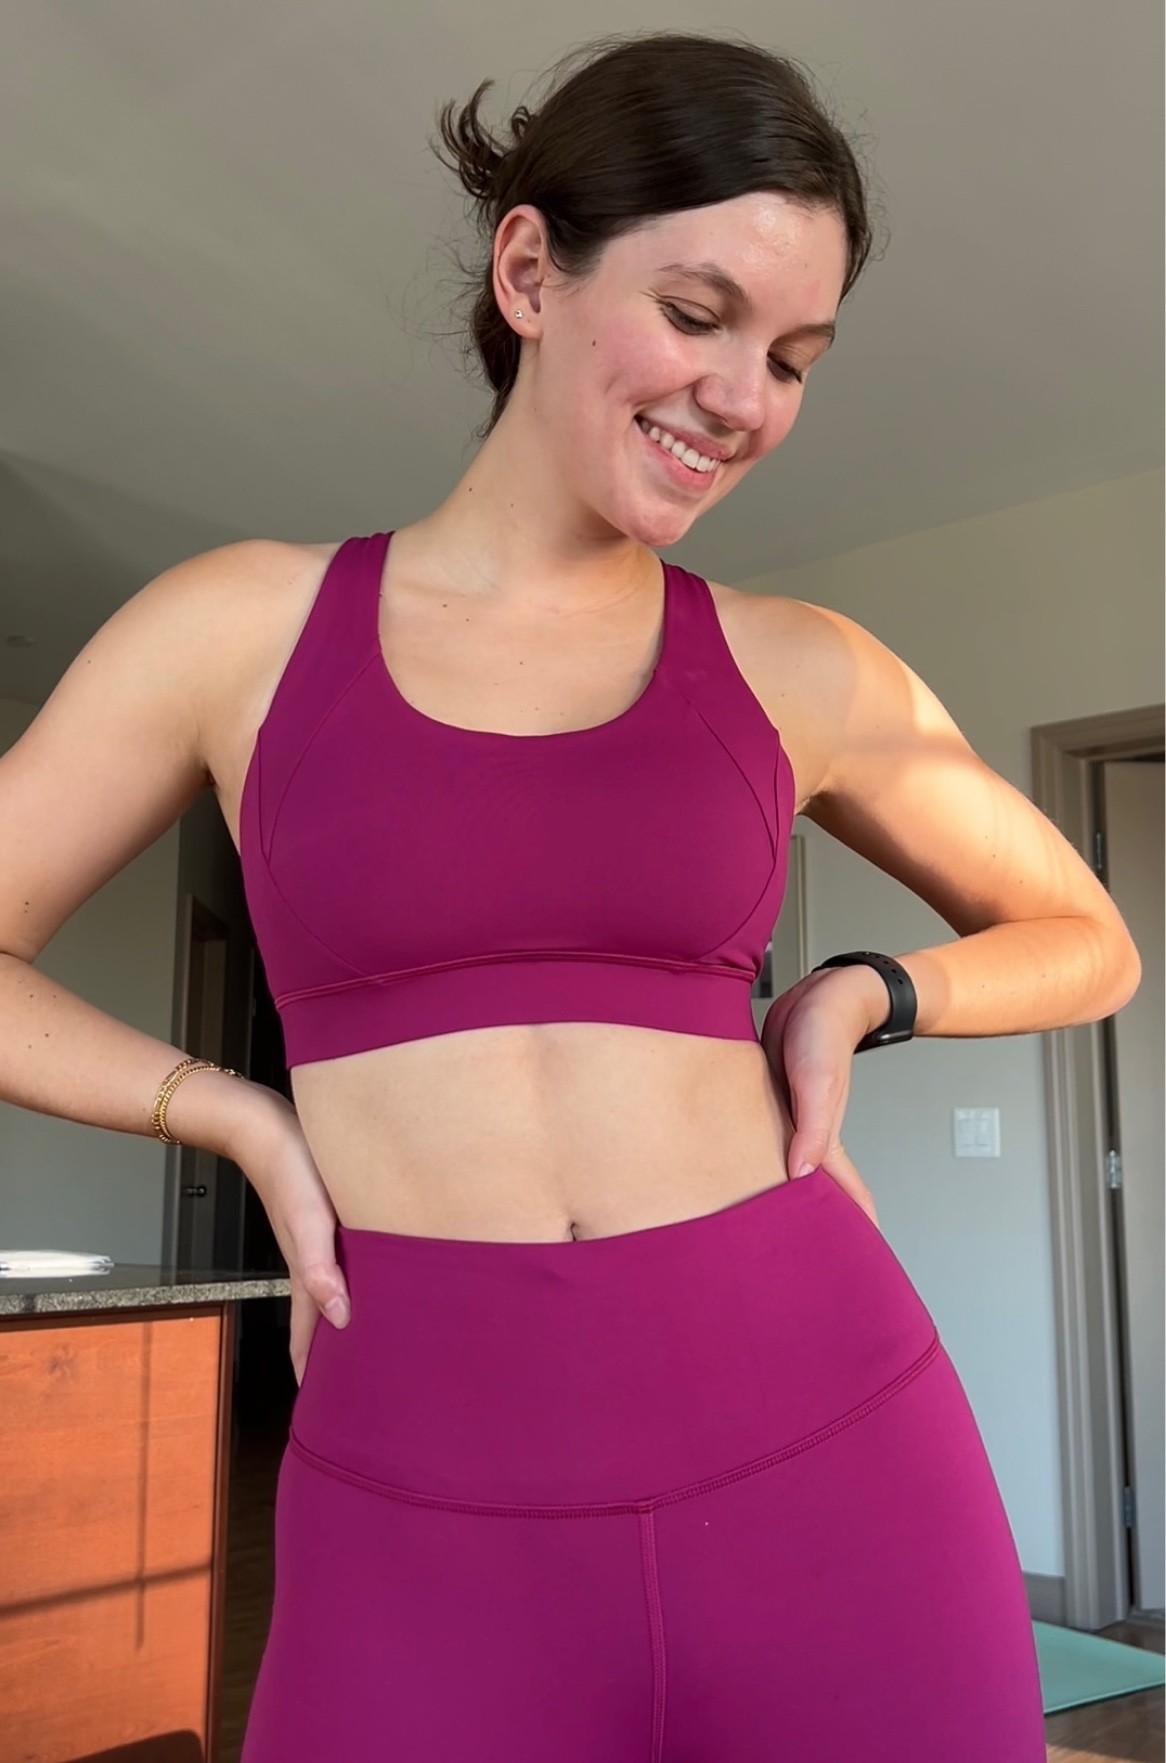 Lululemon Free To Be Elevated Bra *Light Support, DD/E Cup - Pink